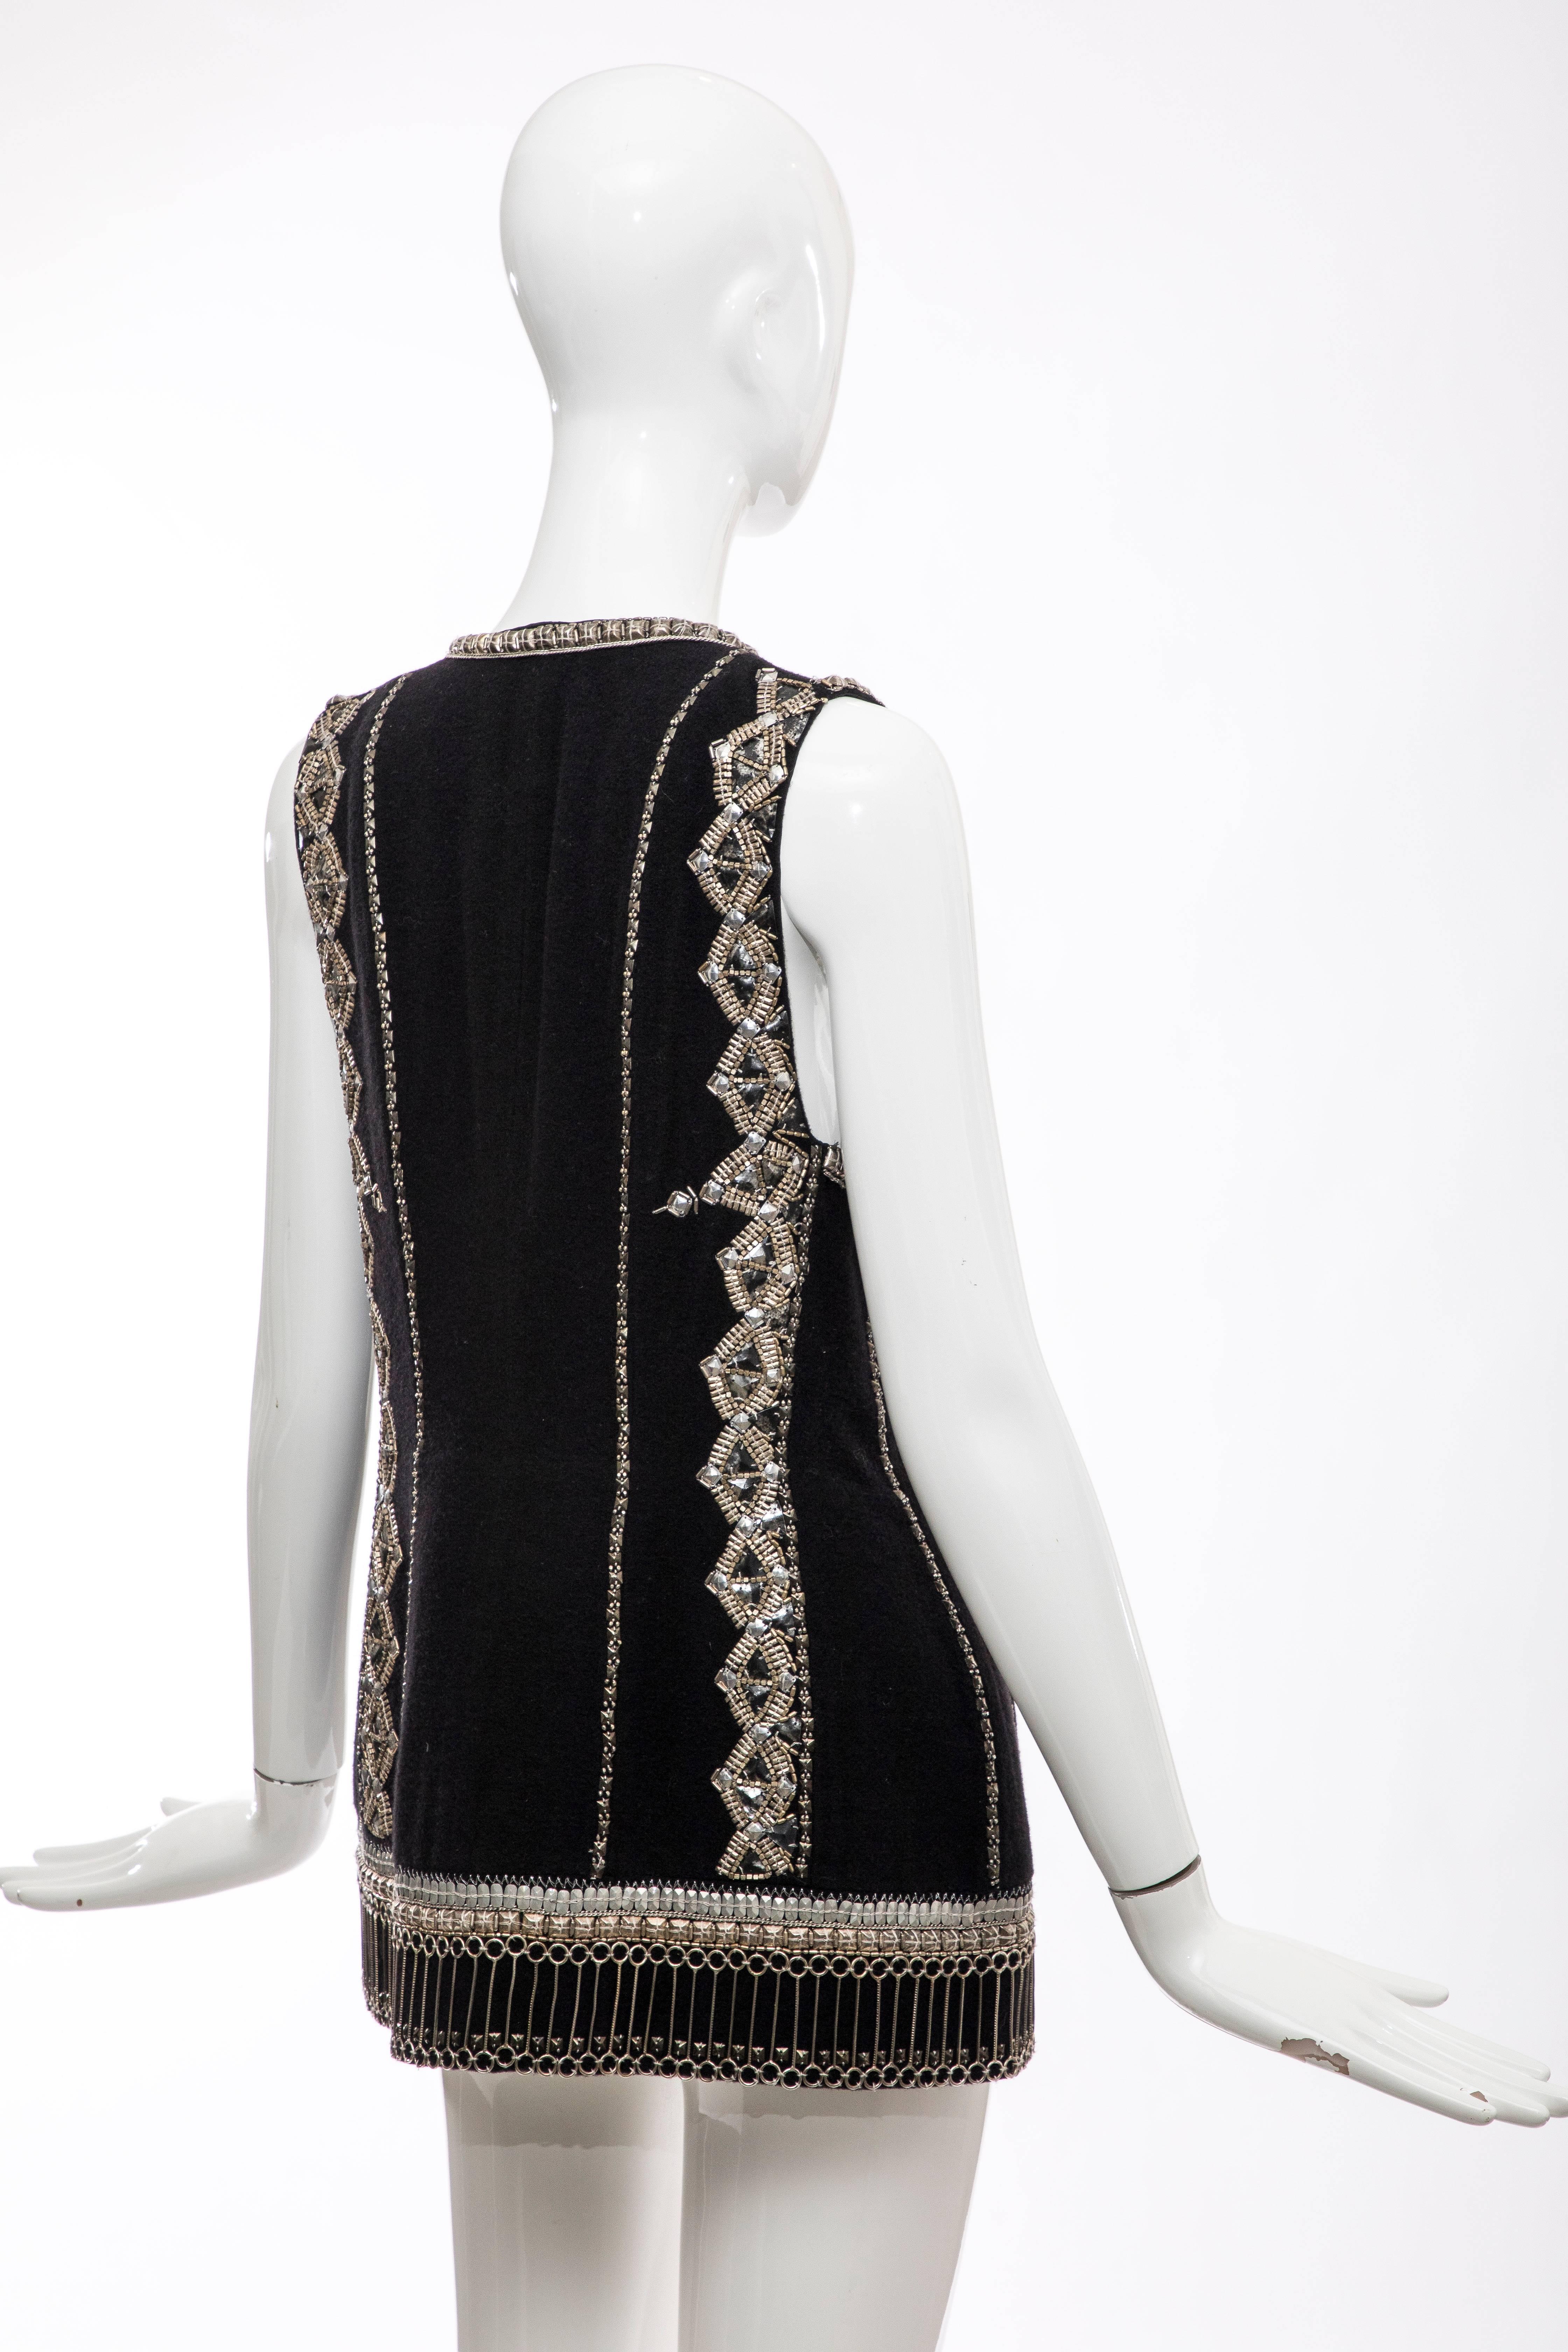 Dries Van Noten Black Wool Cashmere Silver Indian Embroidered Vest, Fall 2010 2